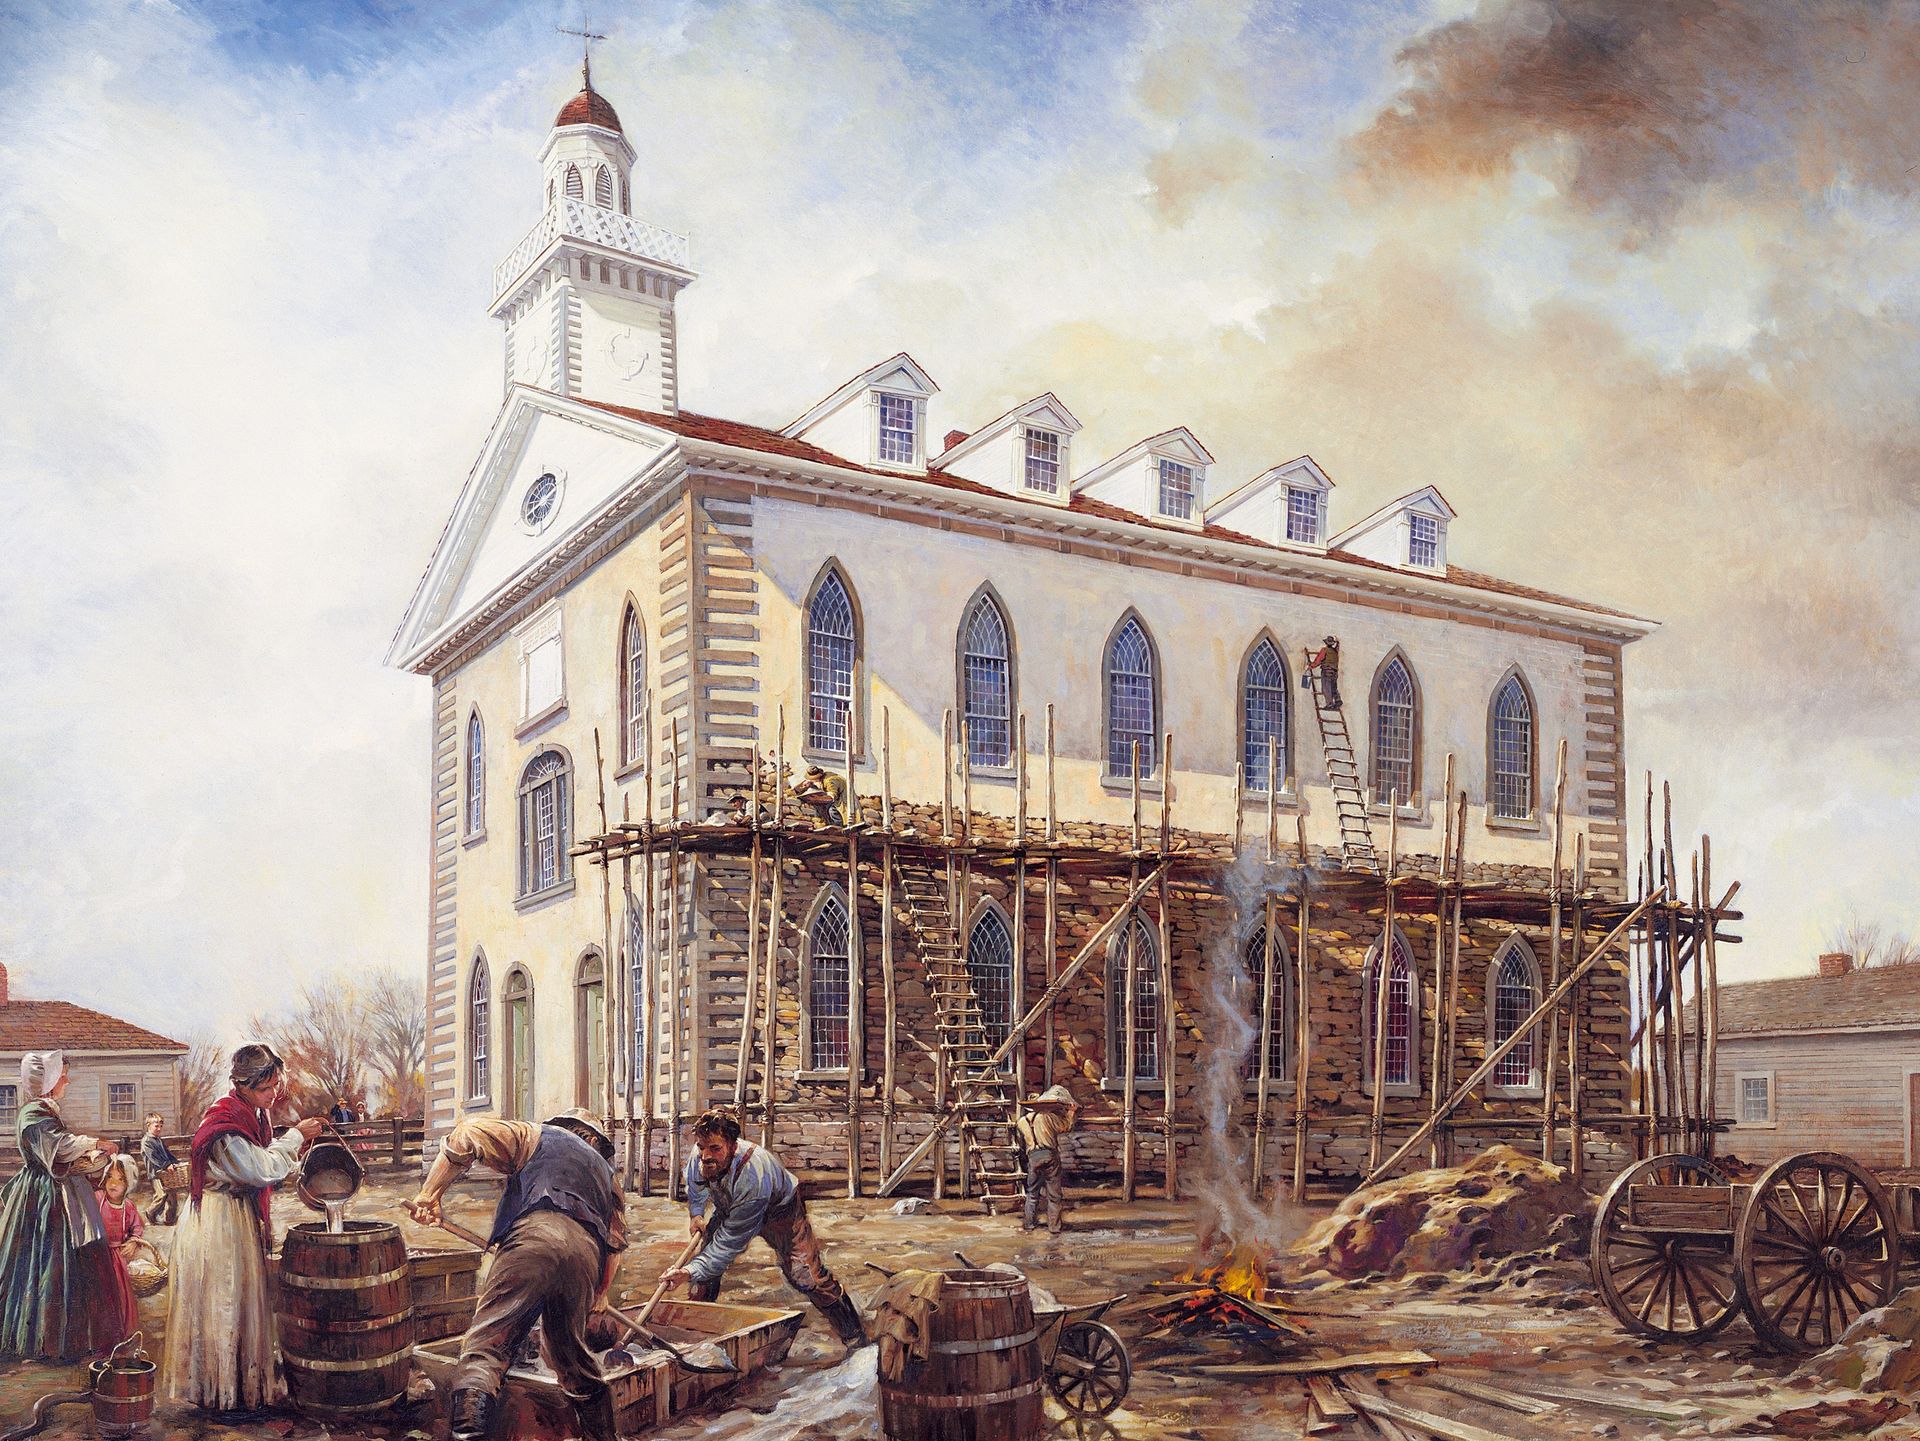 "Building the Kirtland Temple," by Walter Rane.